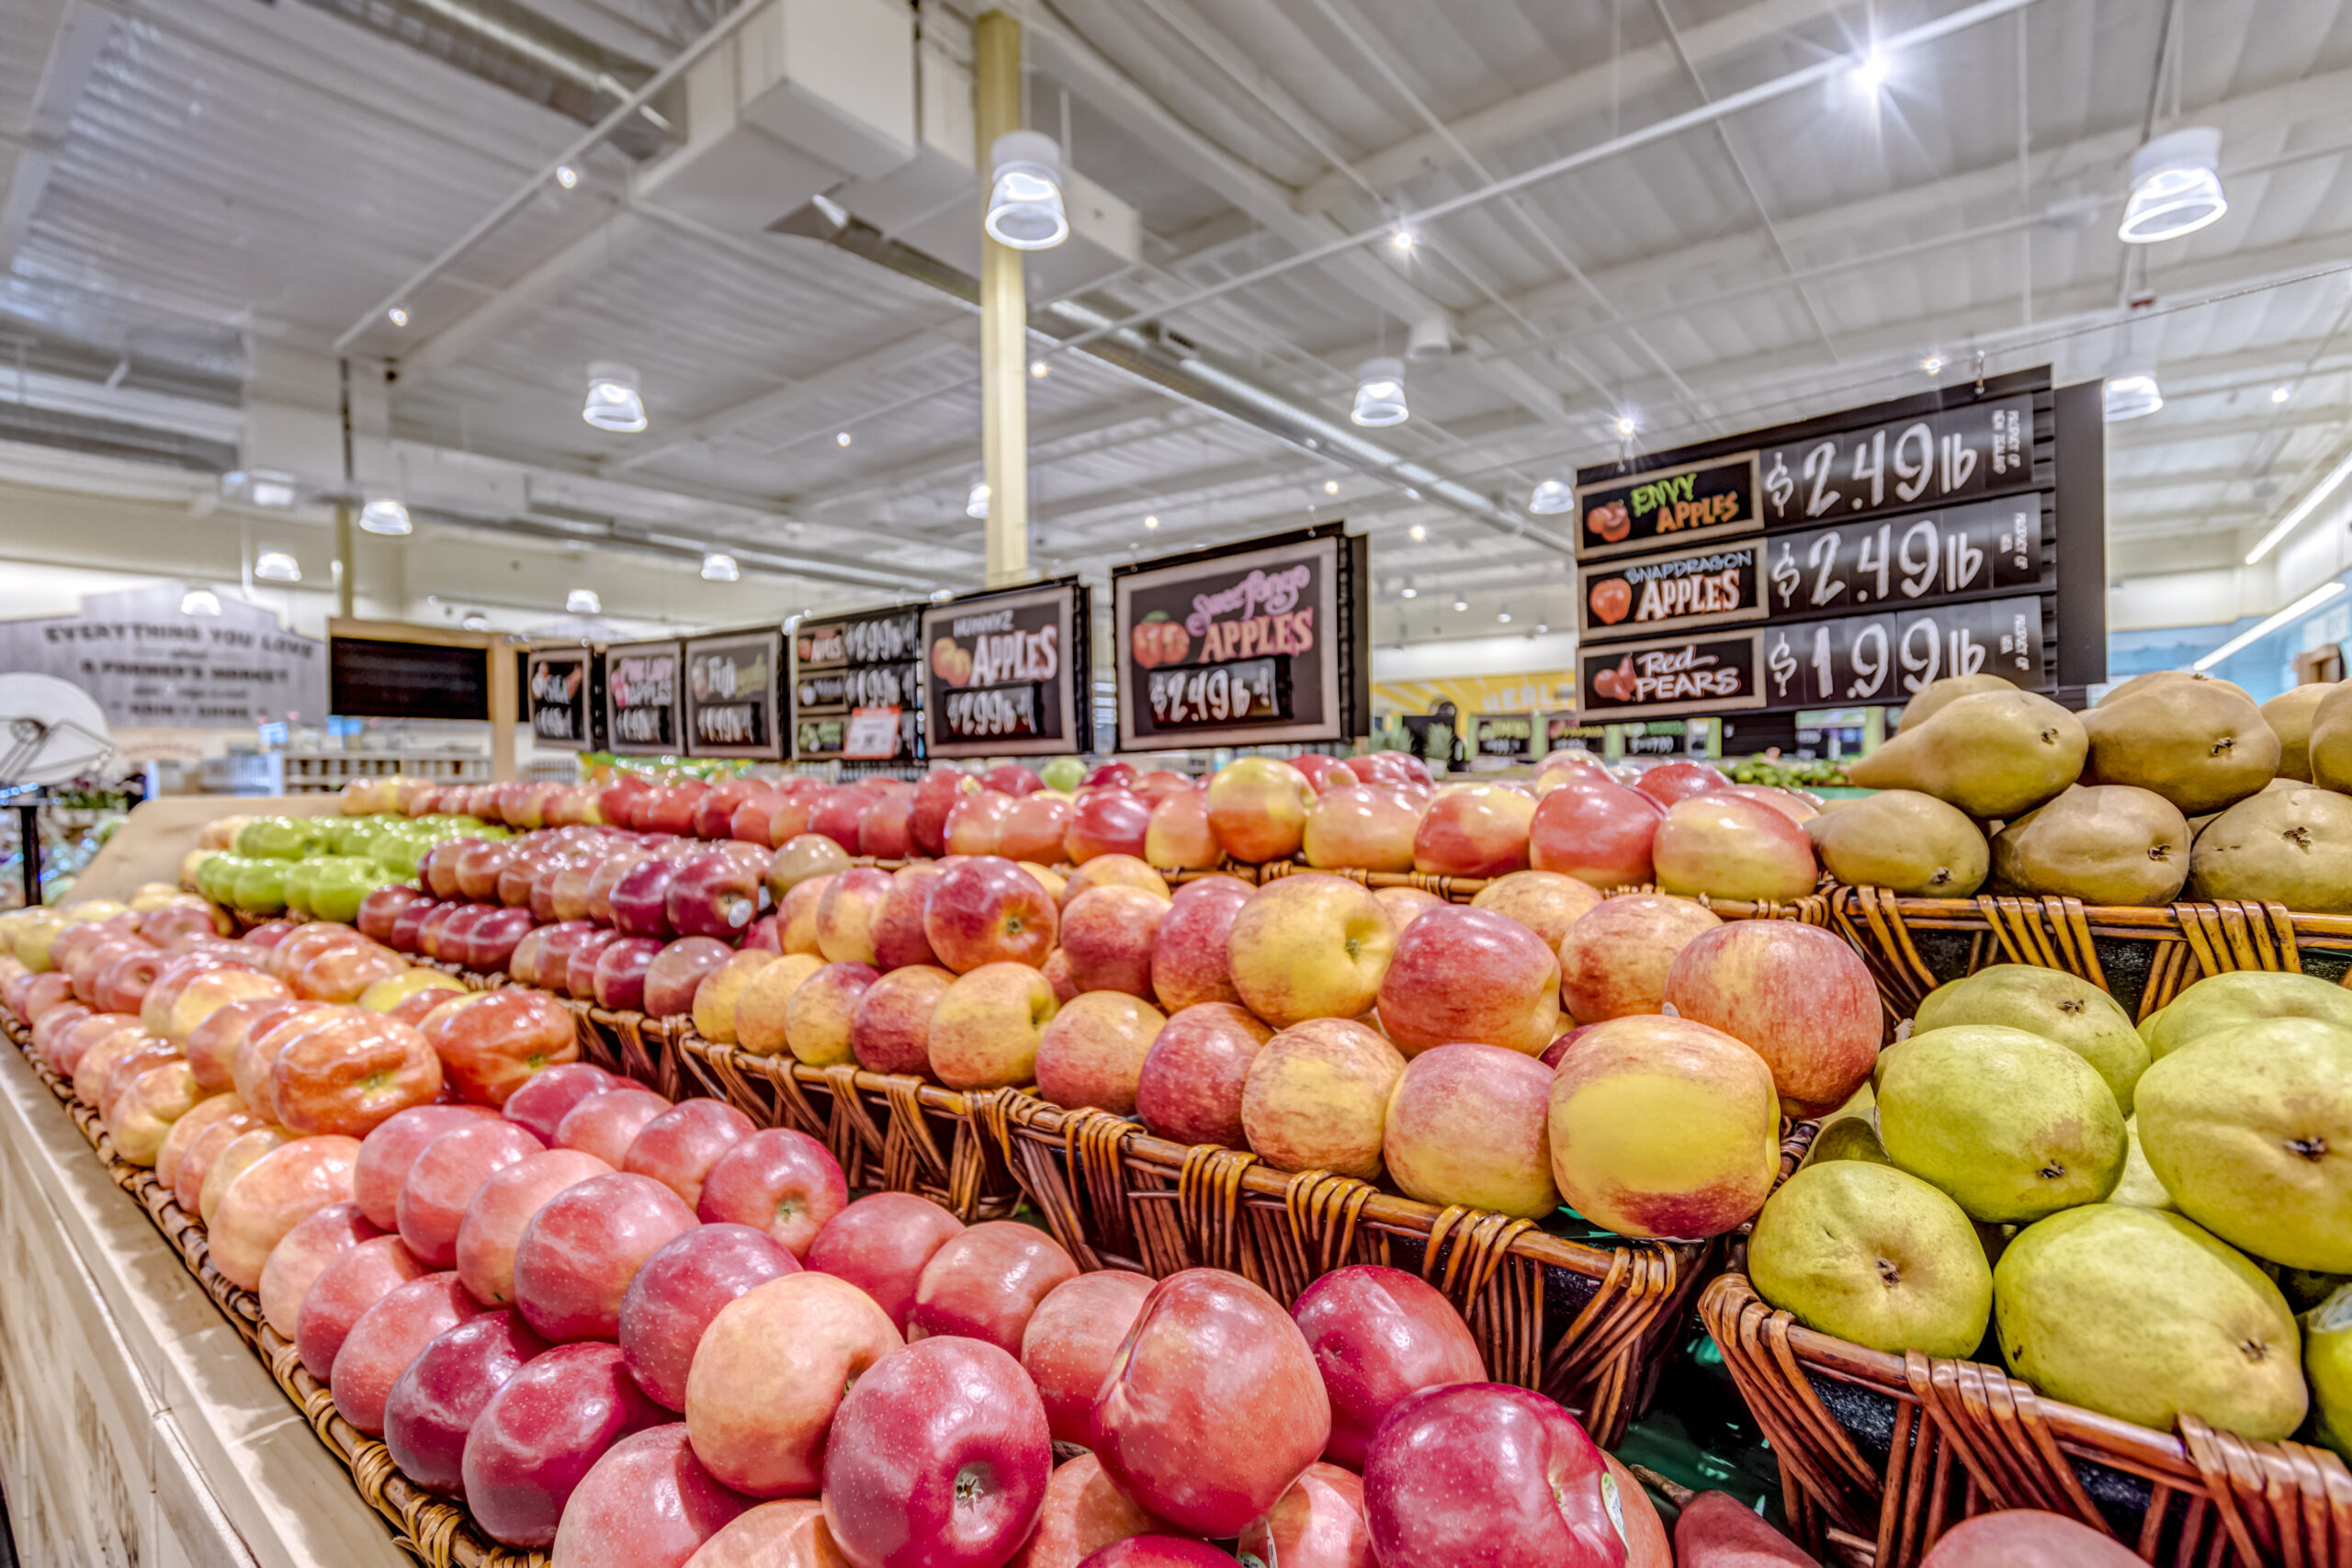 A wide selection of apples and pears in a brightly lit aisle of Sprout Farmers Market.